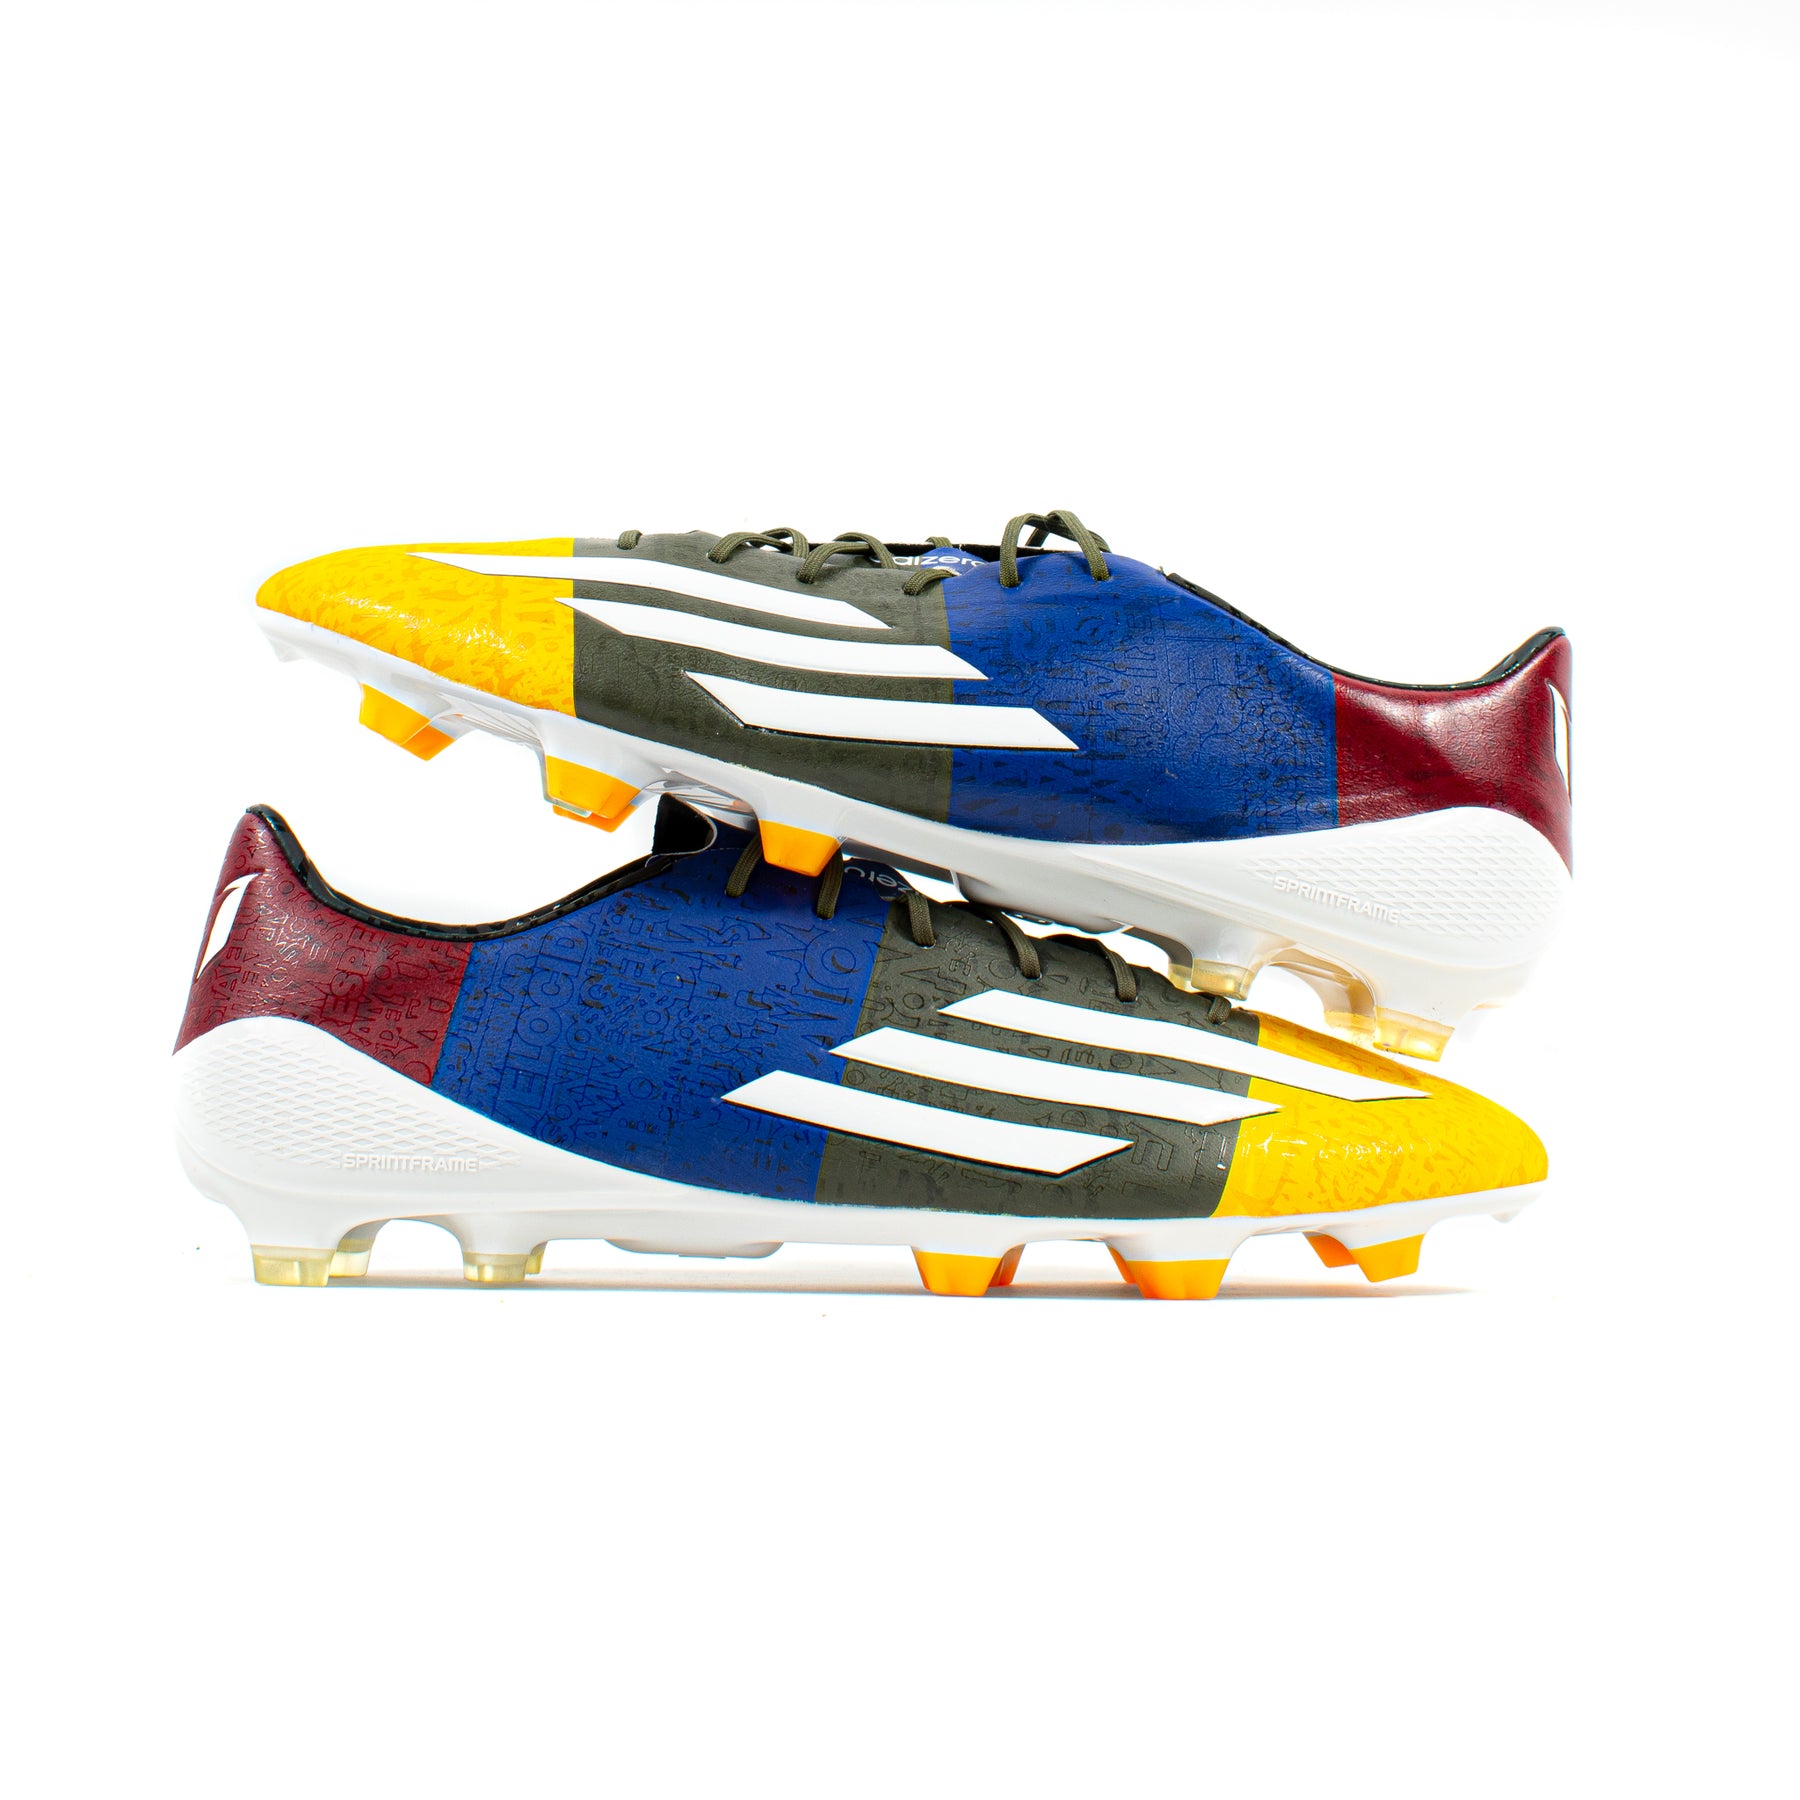 Adidas F50 Messi FG – Classic Soccer Cleats